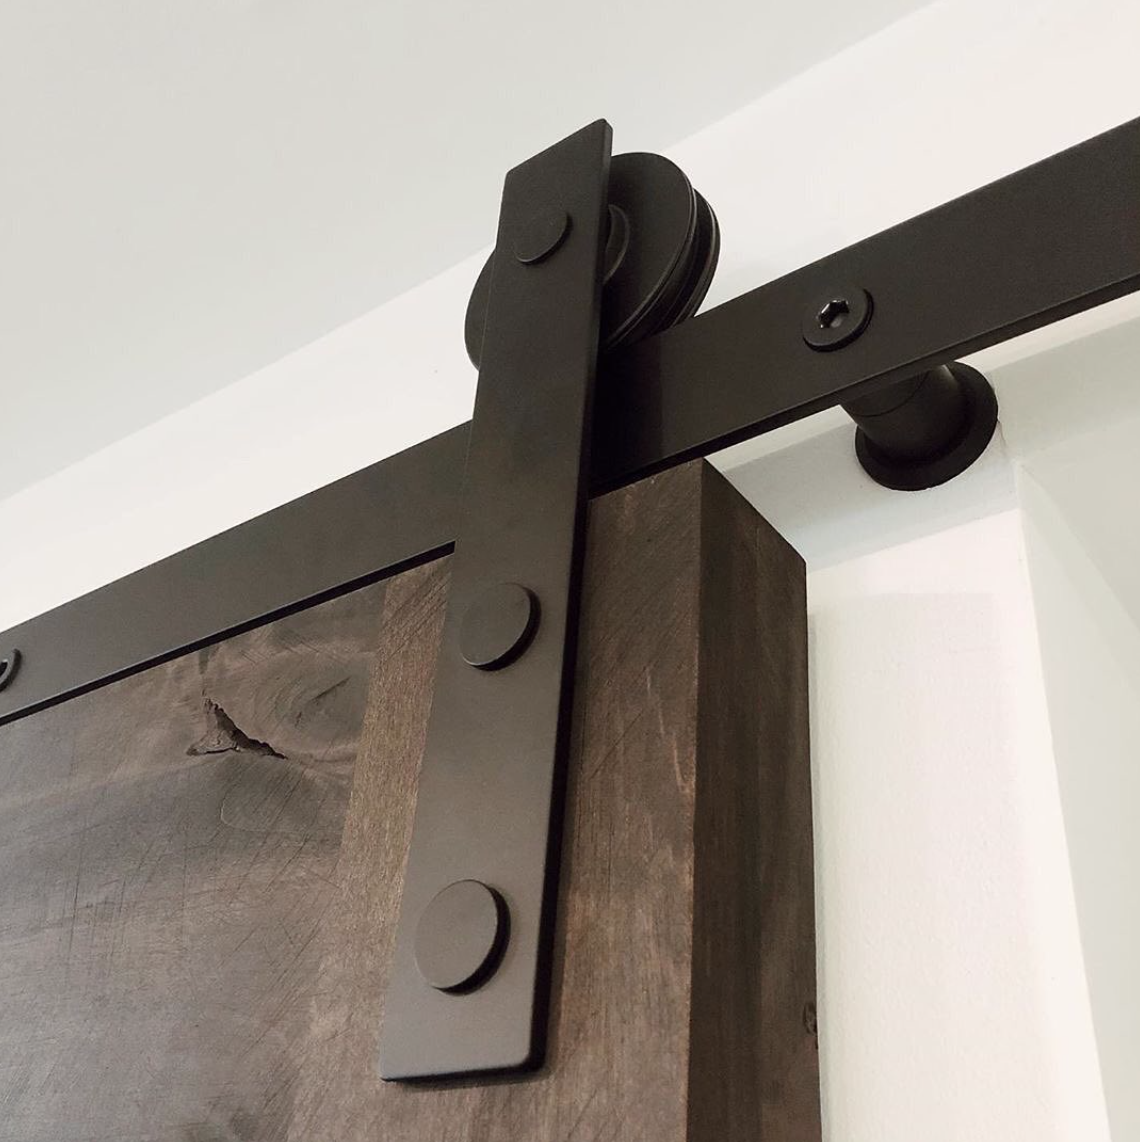  They’re also answering the farm house trend with sliding, barn door hardware. 